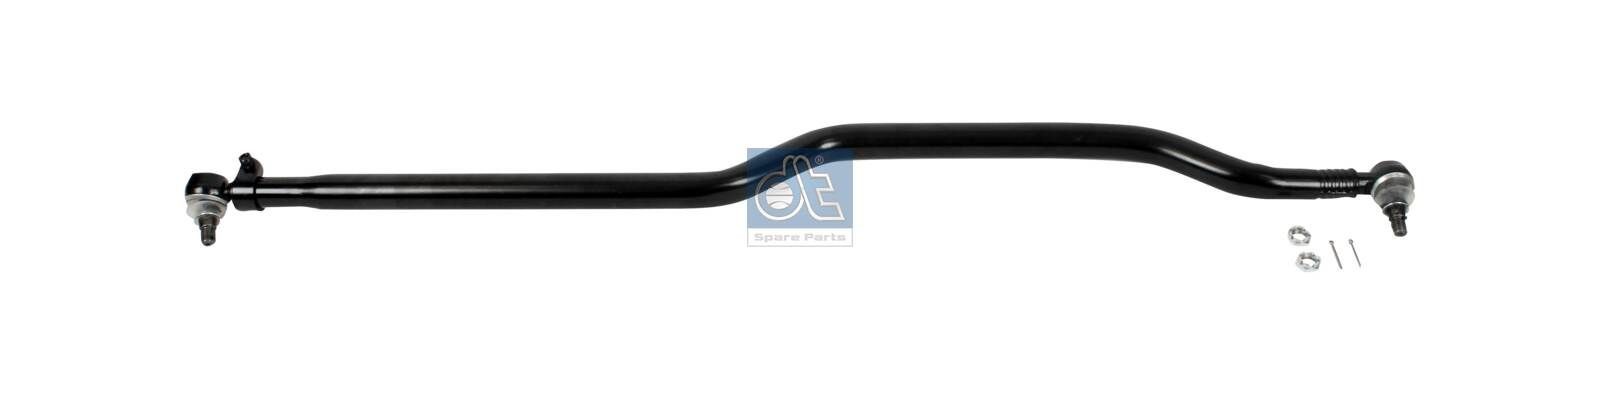 DT Spare Parts 4.66465 Rod Assembly 385 330 18 03